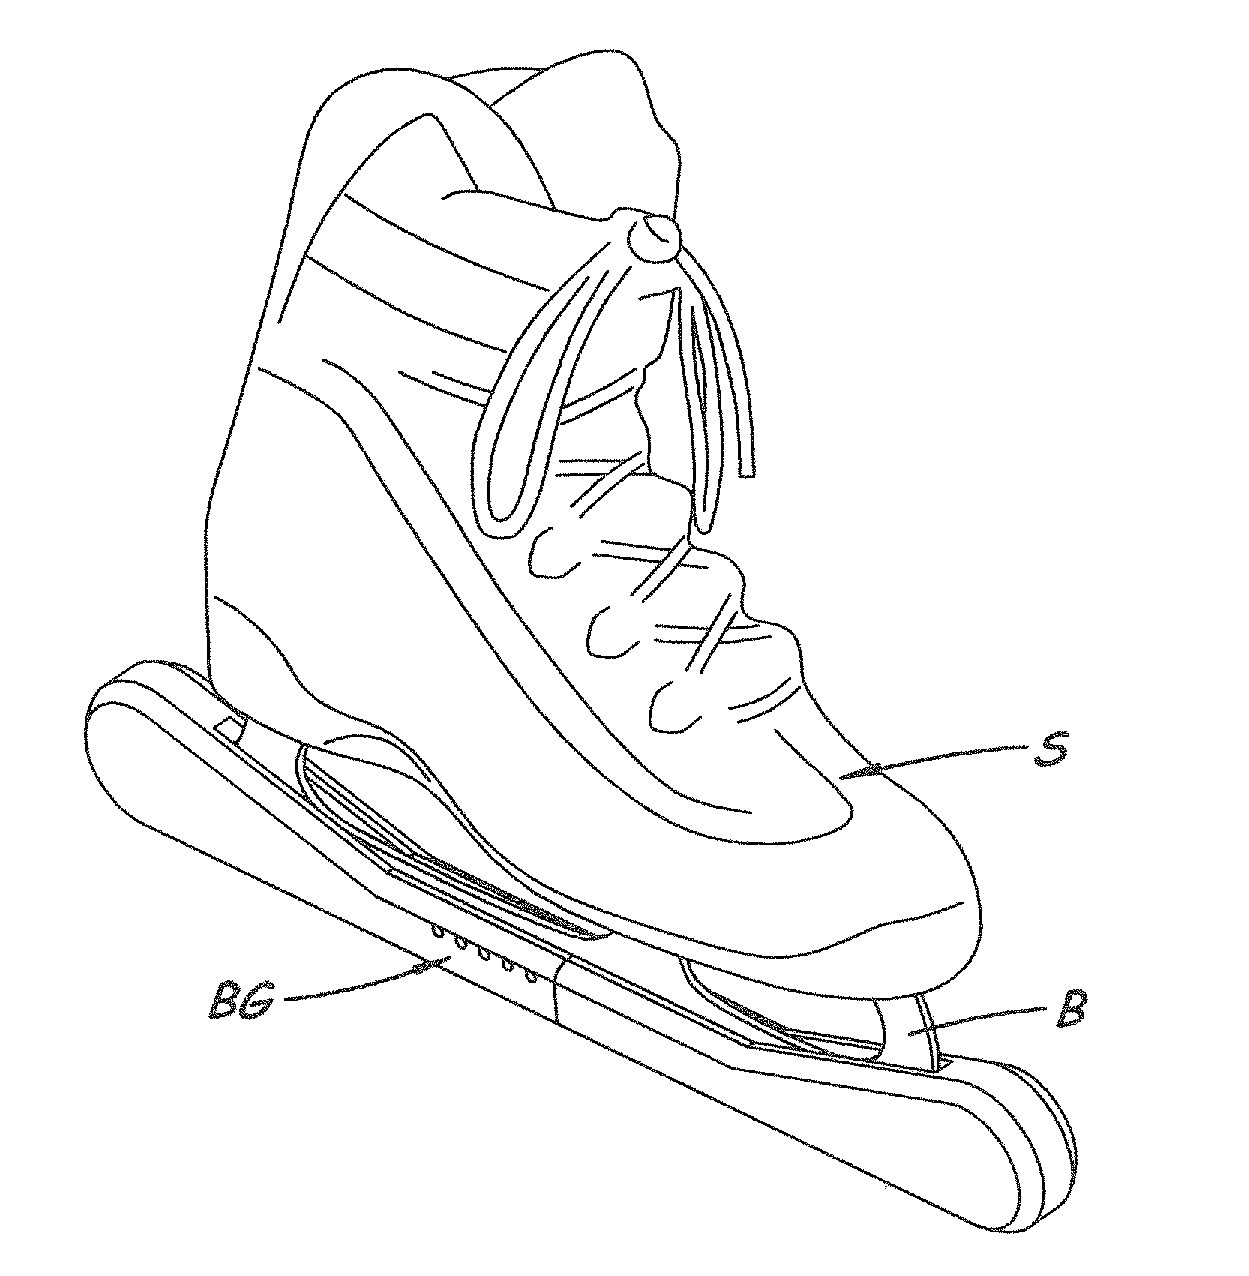 Ice skate blade guard with safety feature